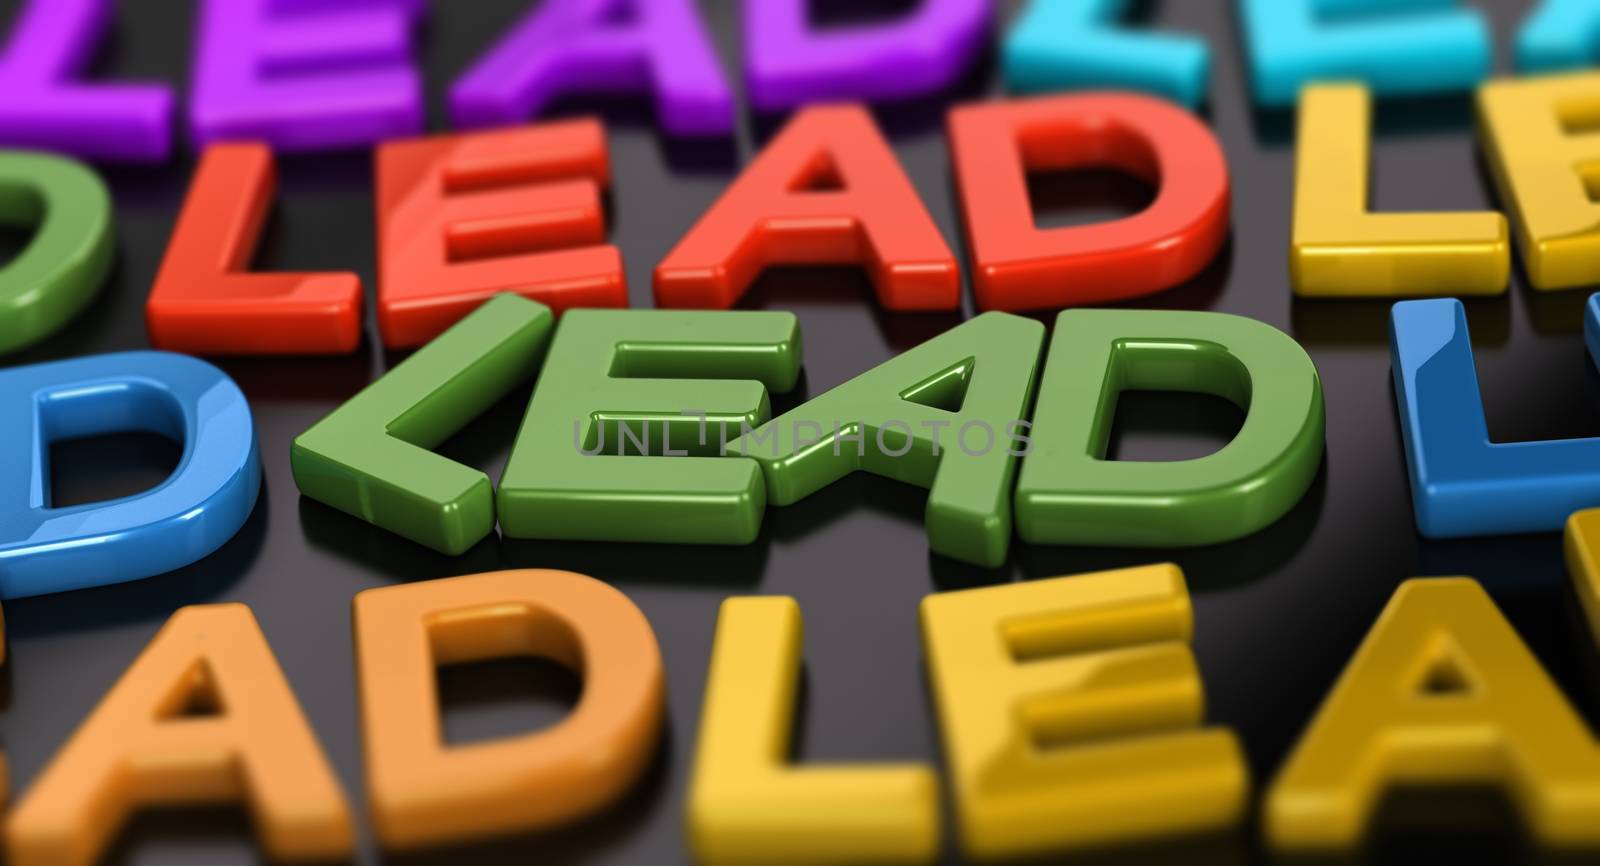 Focus on the word lead with many words around over black background. 3D concept illustration of leads generation.